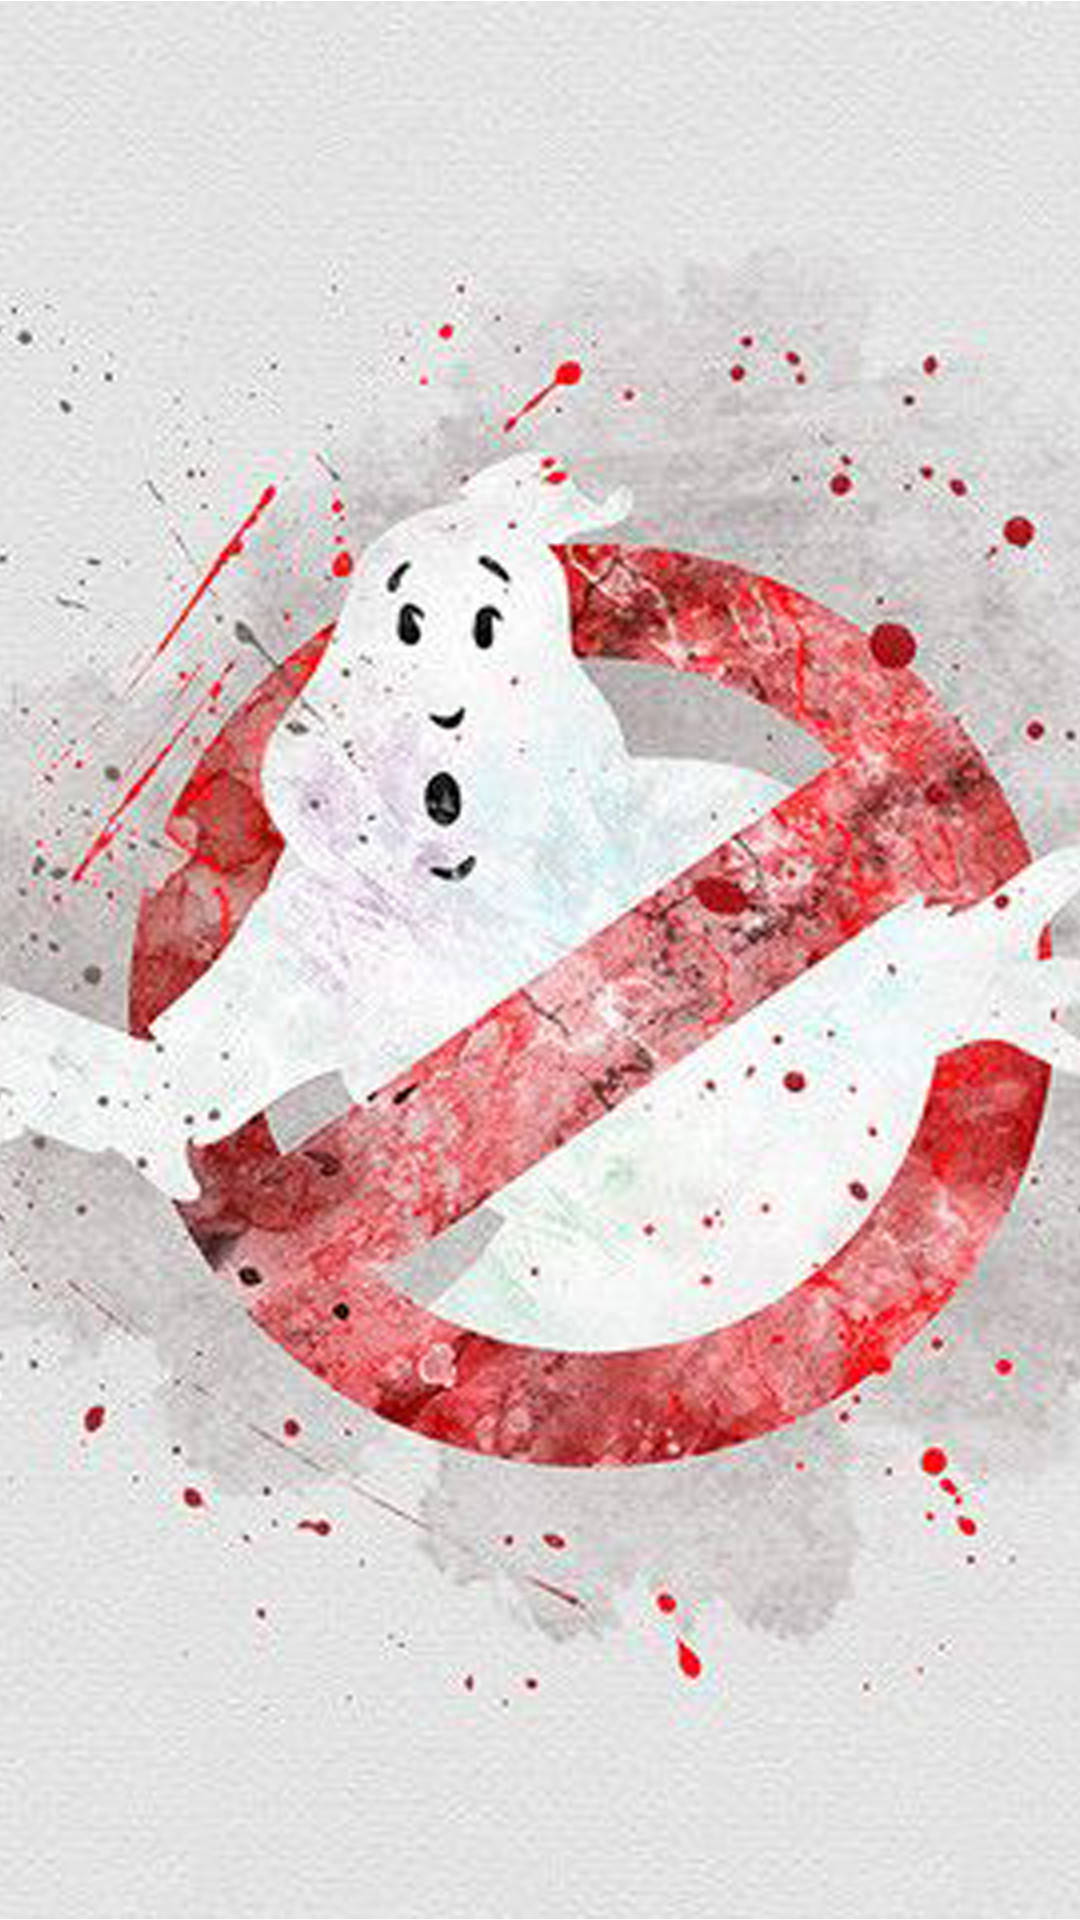 Ghostbusters Digital Painting Background